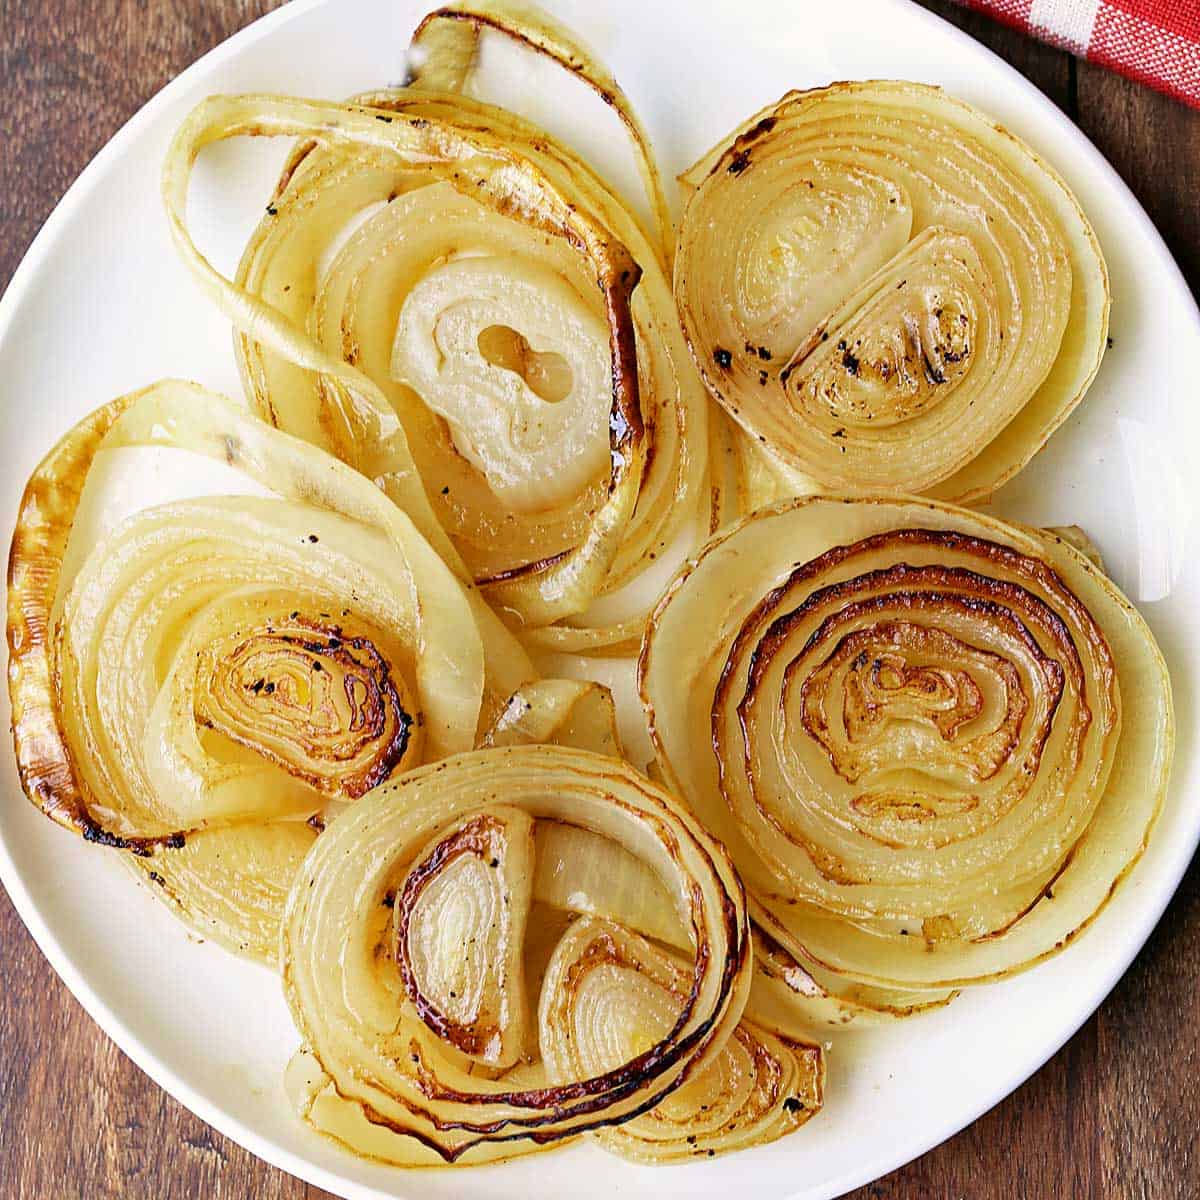 Roasted onions are served on a white plate.